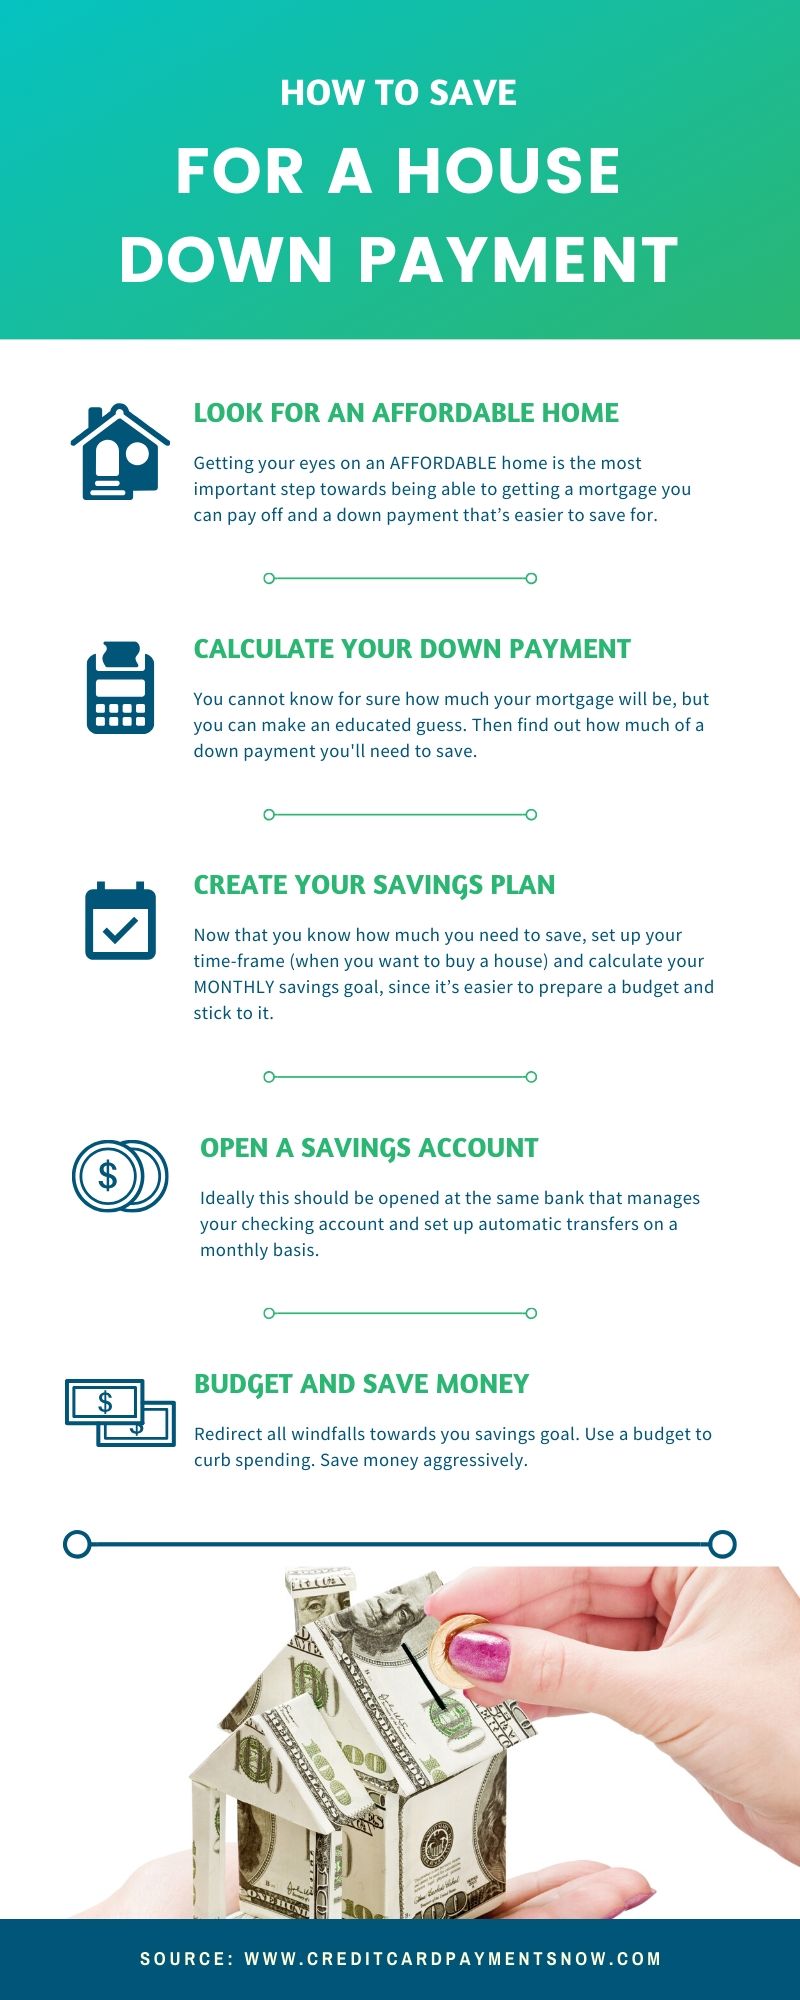 HOW TO SAVE FOR A HOUSE DOWN PAYMENT Infographic